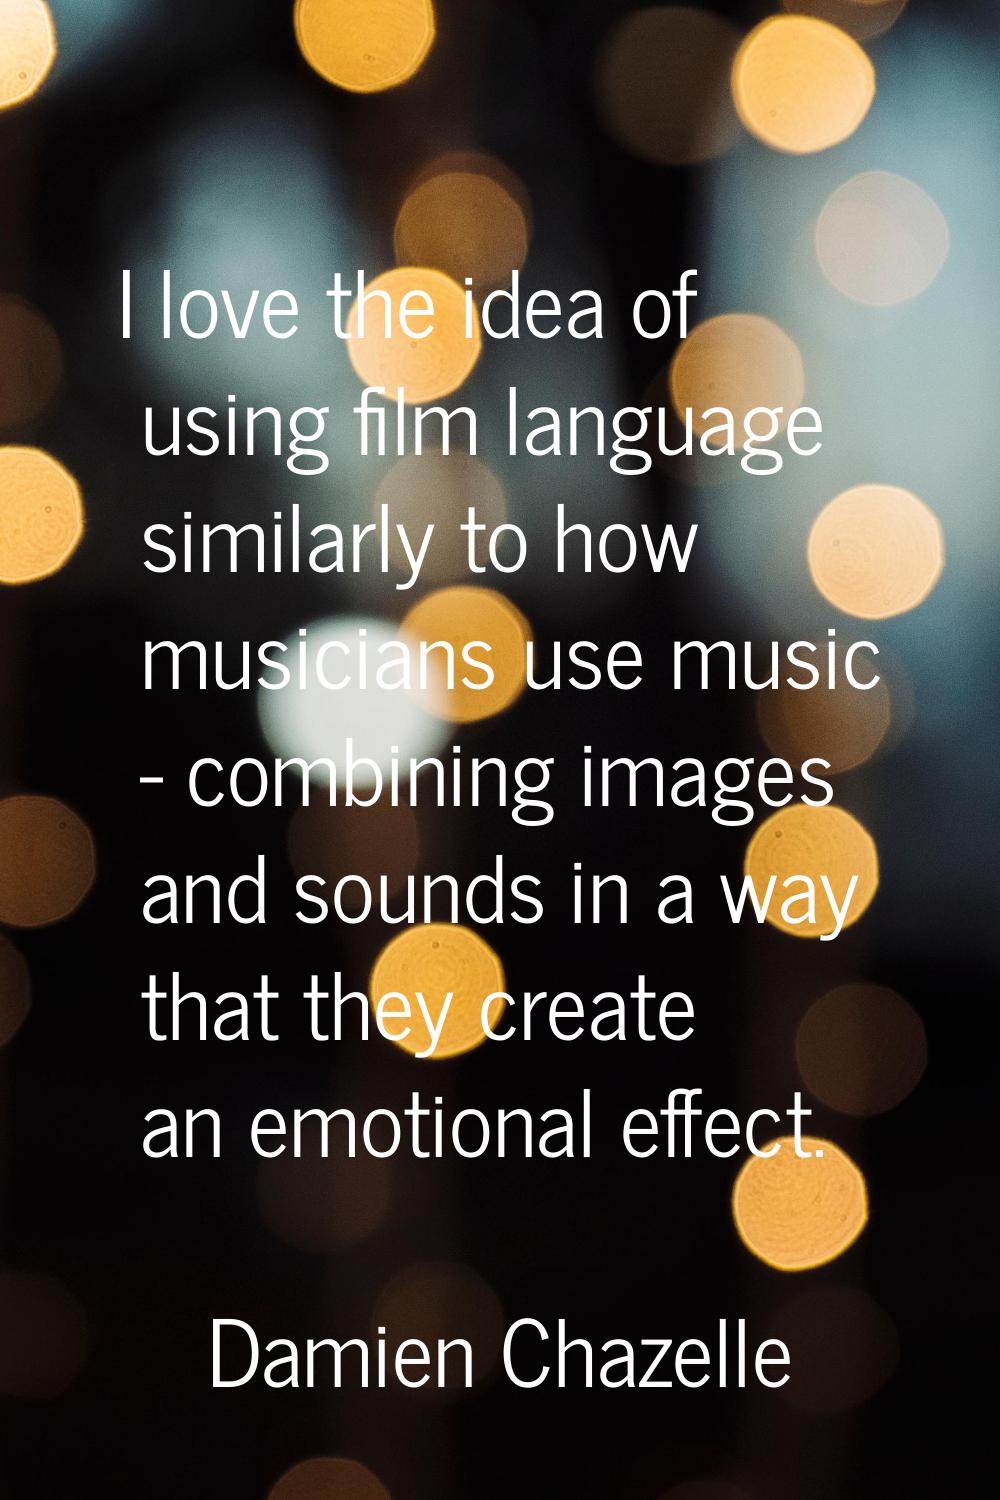 I love the idea of using film language similarly to how musicians use music - combining images and 